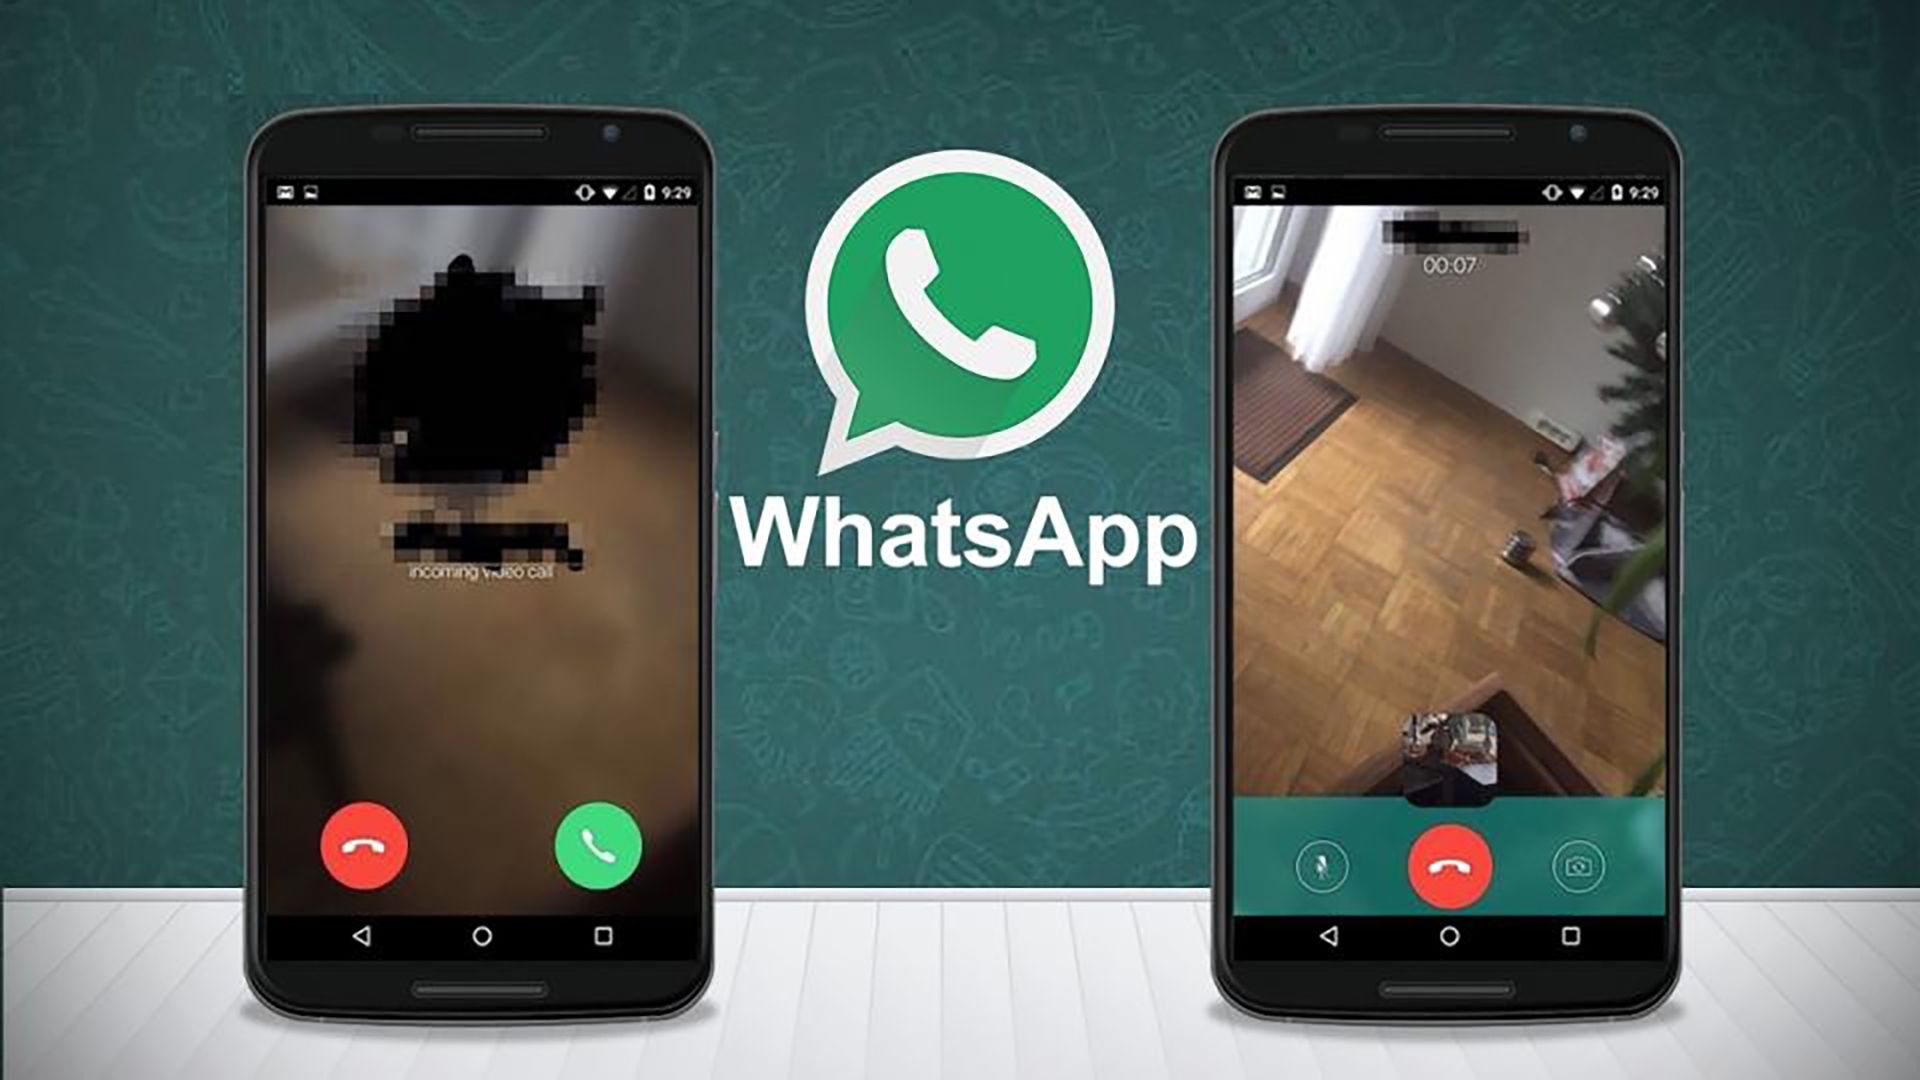 Now you can make video calls on WhatsApp, here’s how.